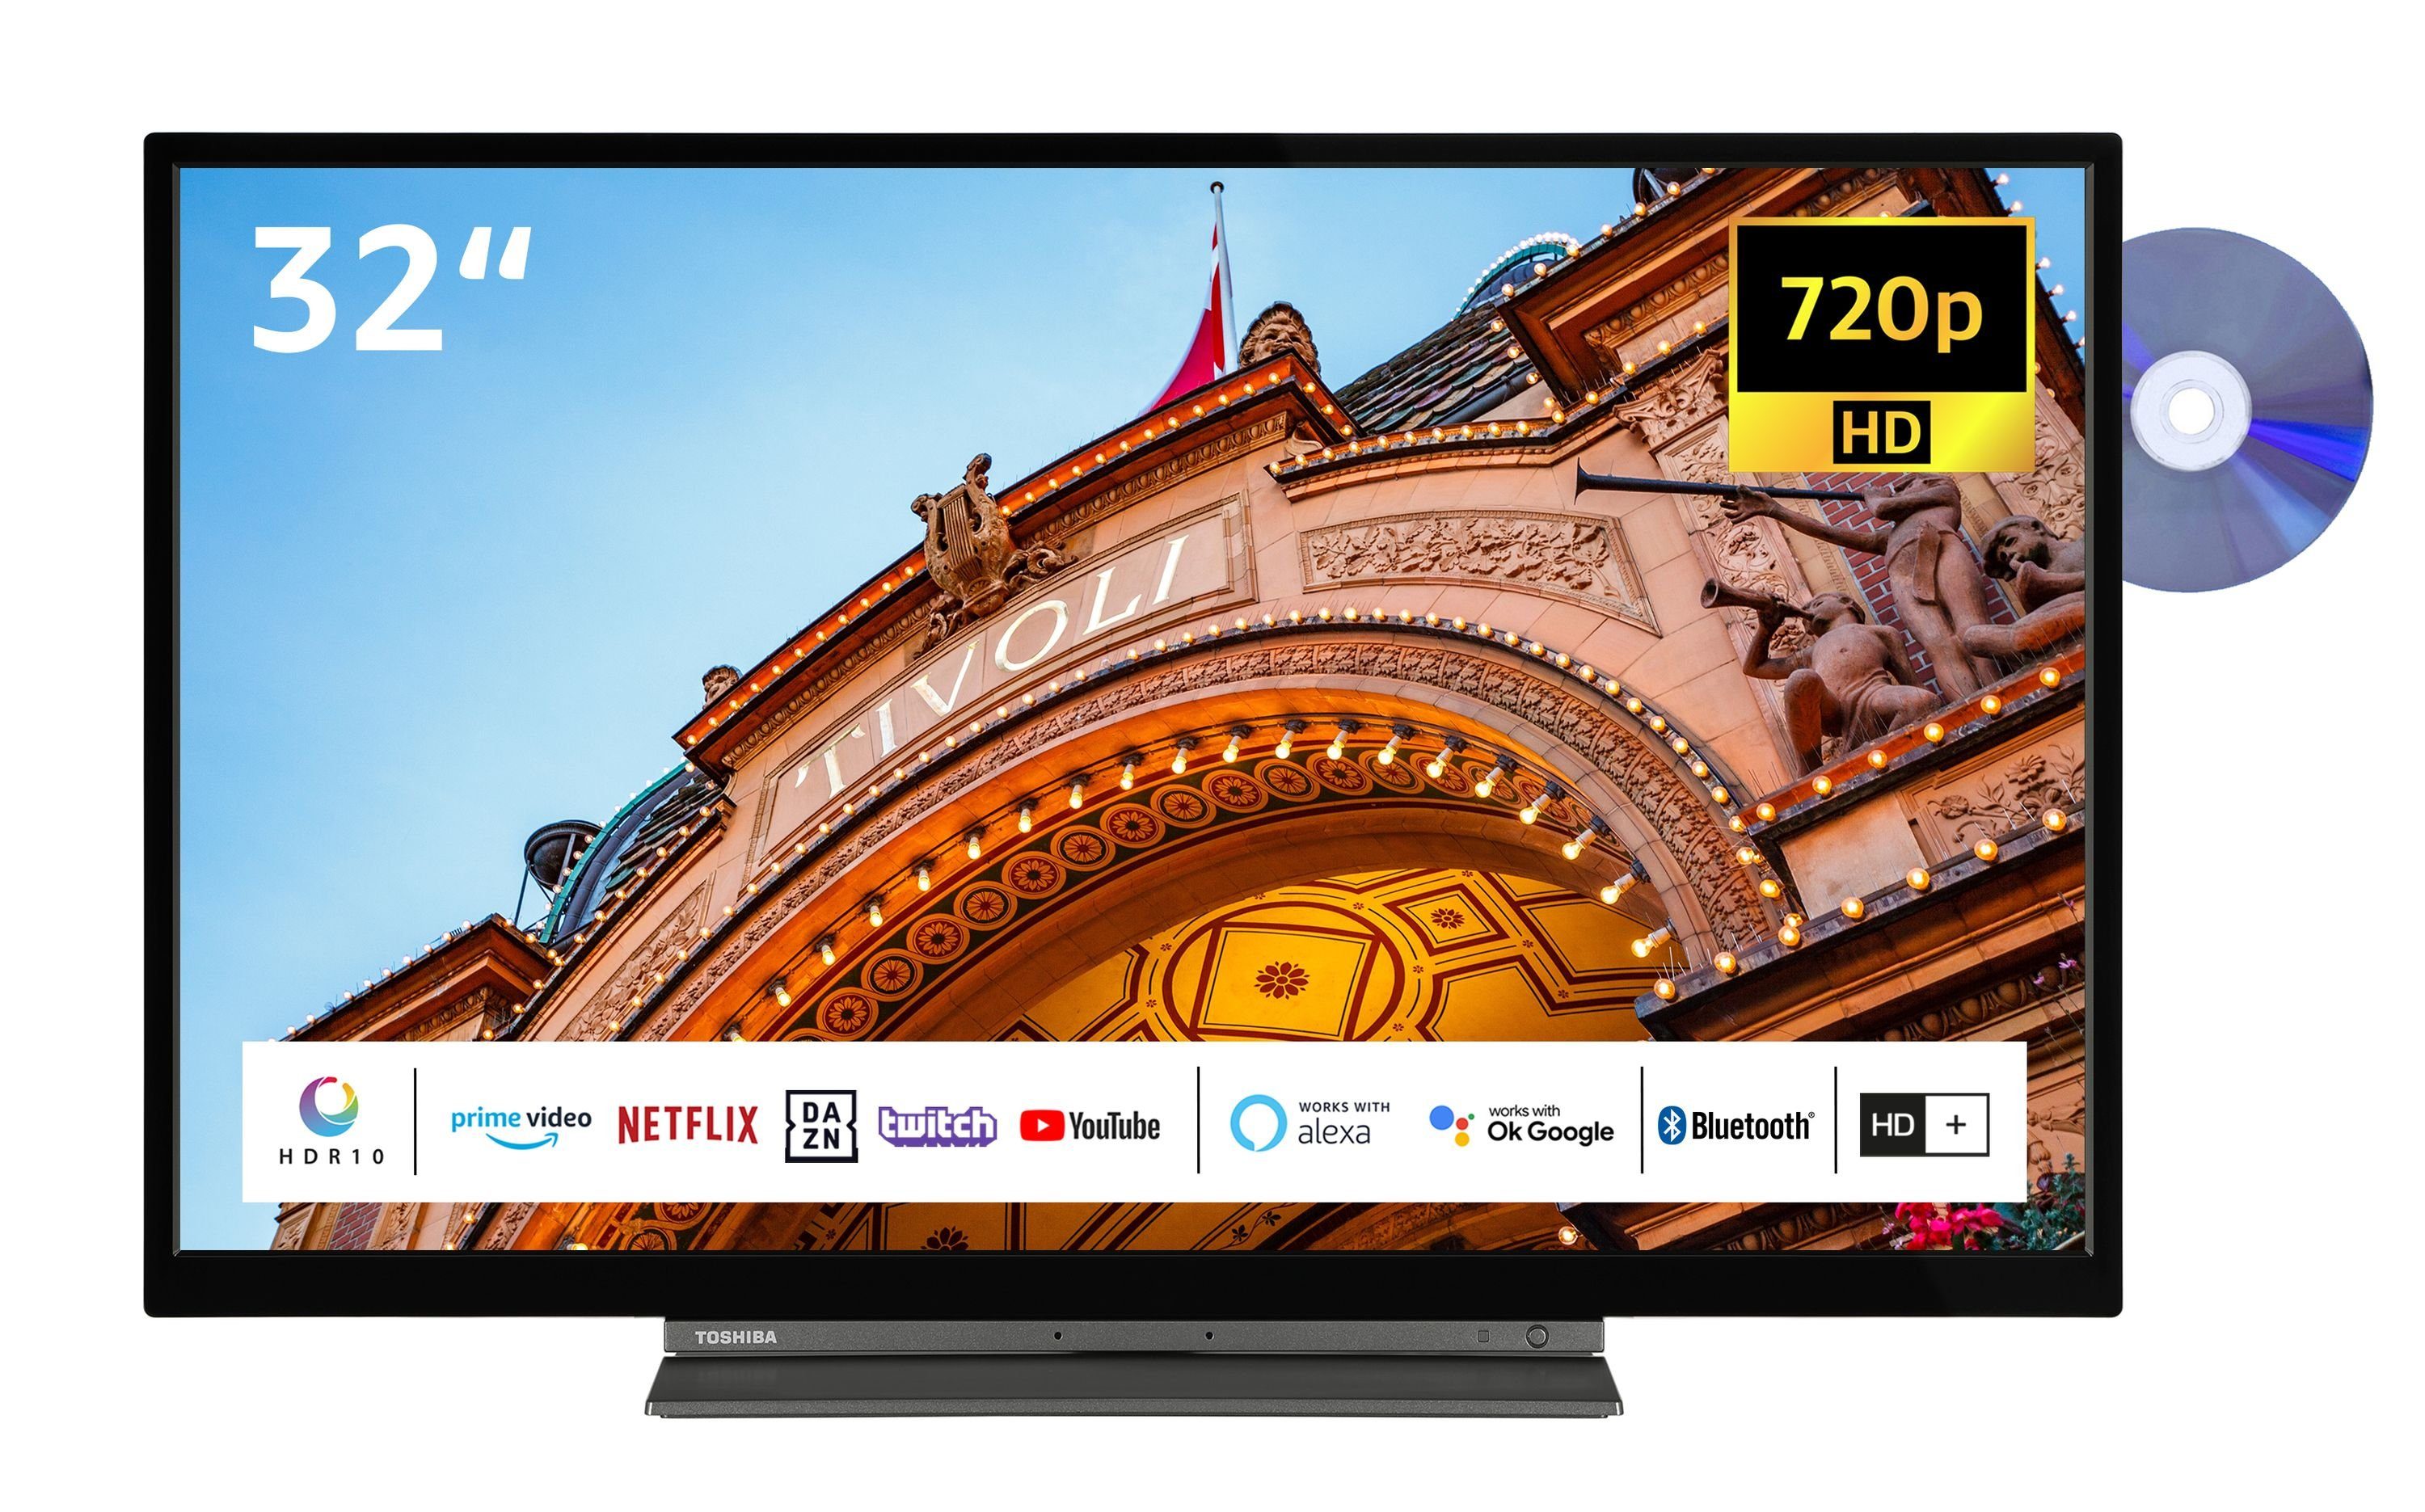 Toshiba 32WD3C63DAY/2 LCD-LED Fernseher (80 cm/32 Zoll, HD-ready, Smart TV, HDR, Triple-Tuner, DVD-Player, 6 Monate HD+ inklusive)